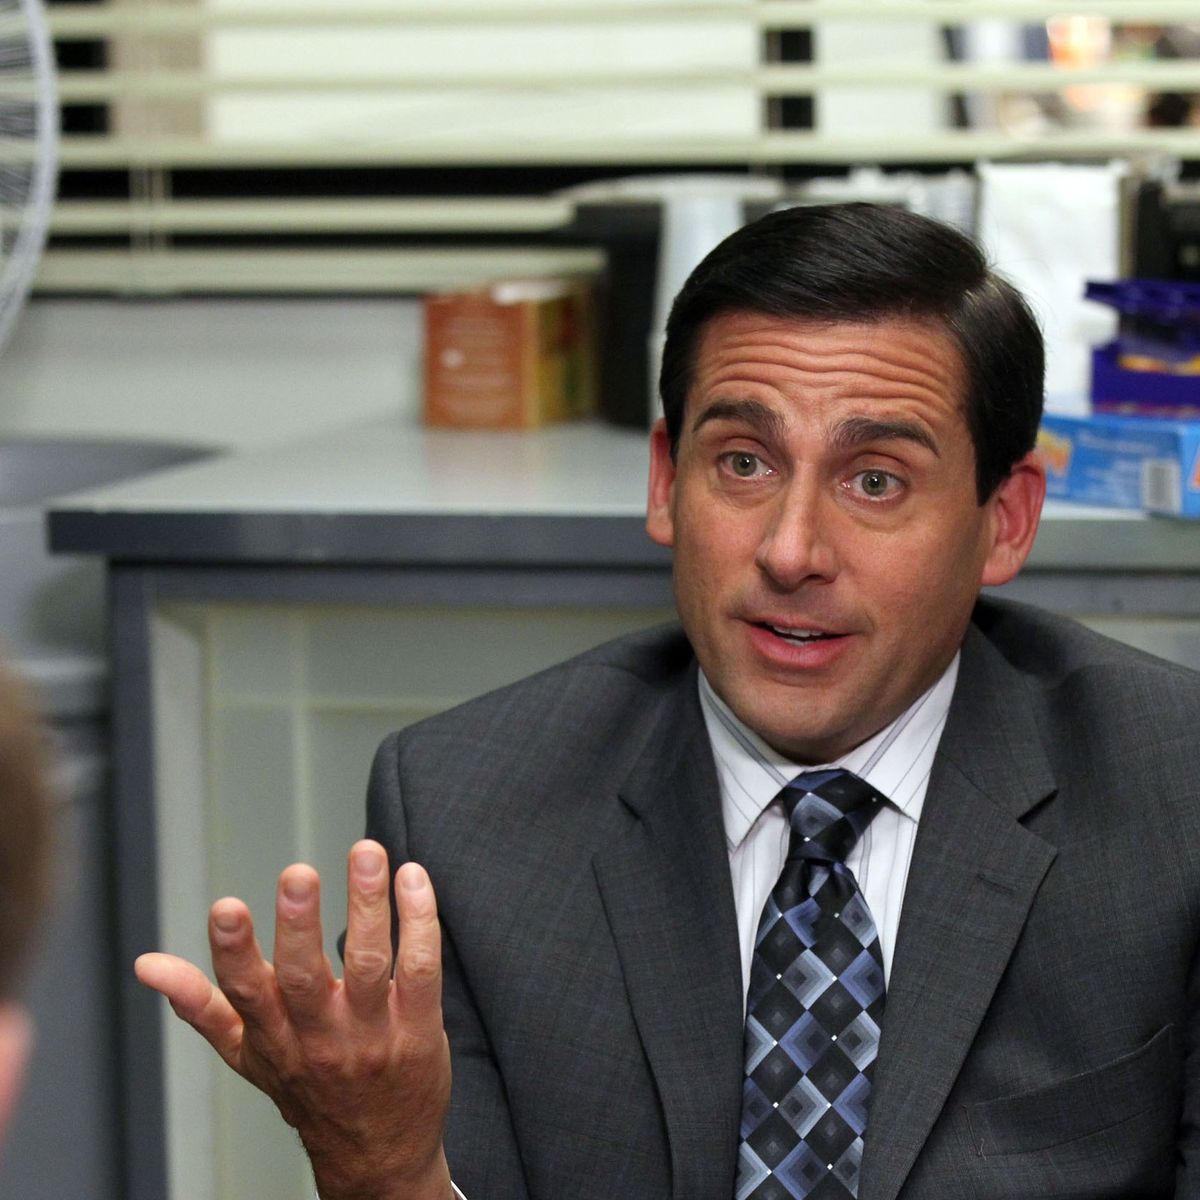 The Office Fan Theory That Explains Why Michael Scott Hates Toby